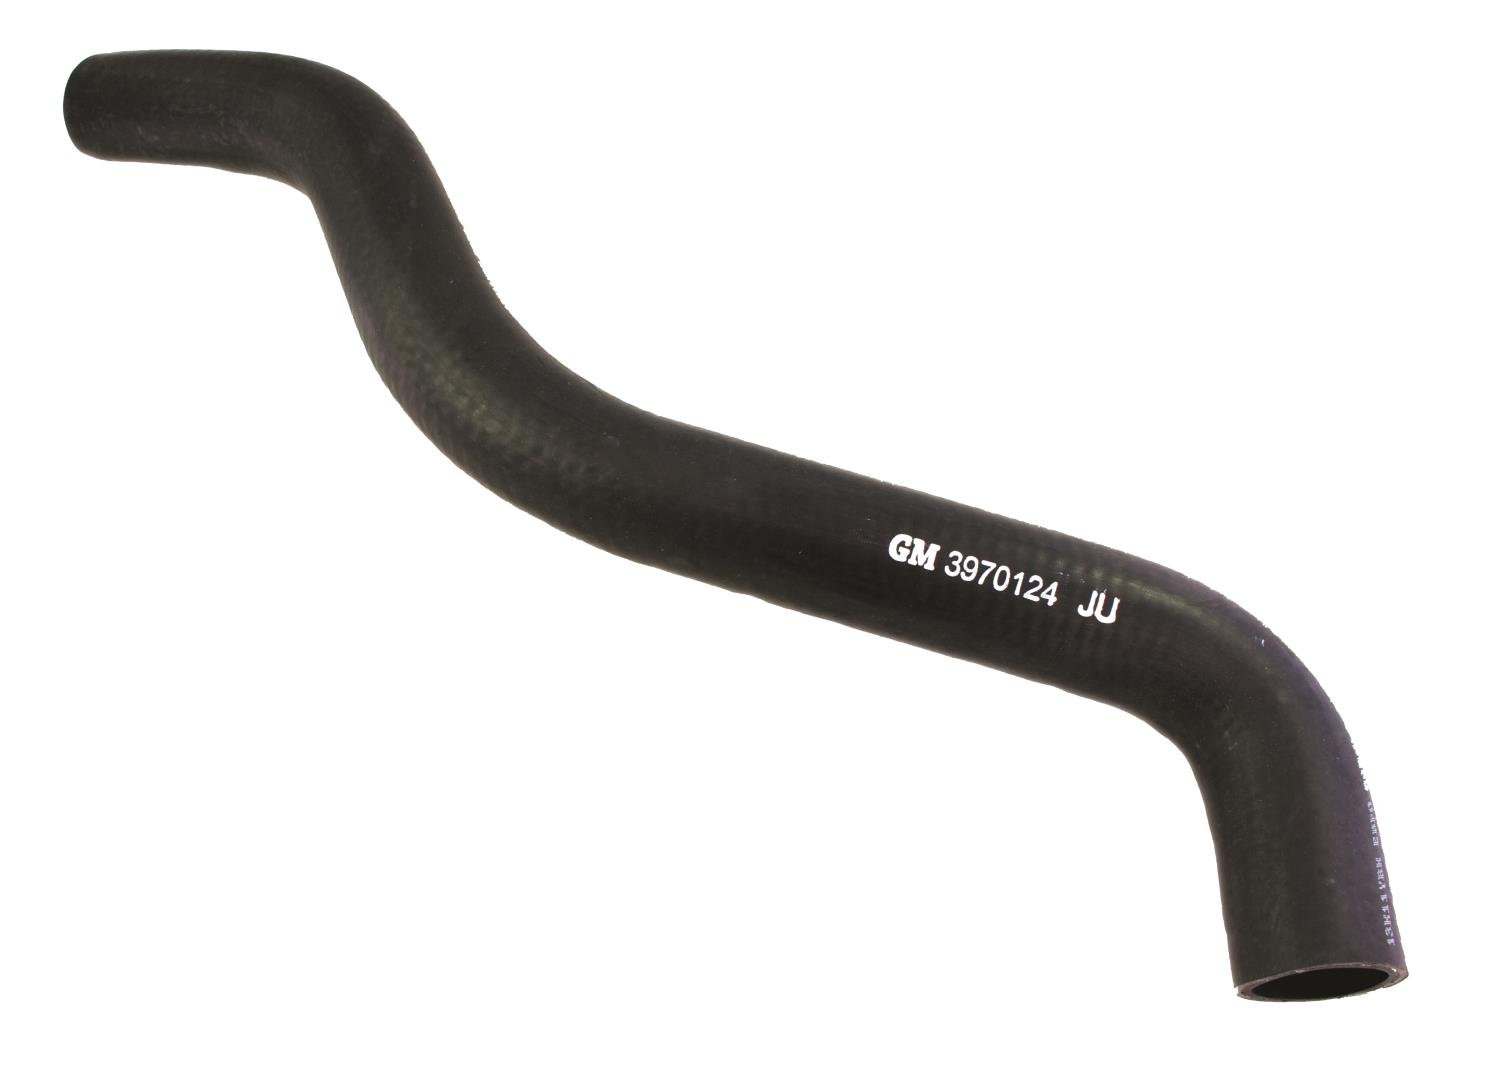 Upper Radiator Hose for 1970-1980 Chevrolet Camaro [Direct-Fit Replacement for GM 3970124]